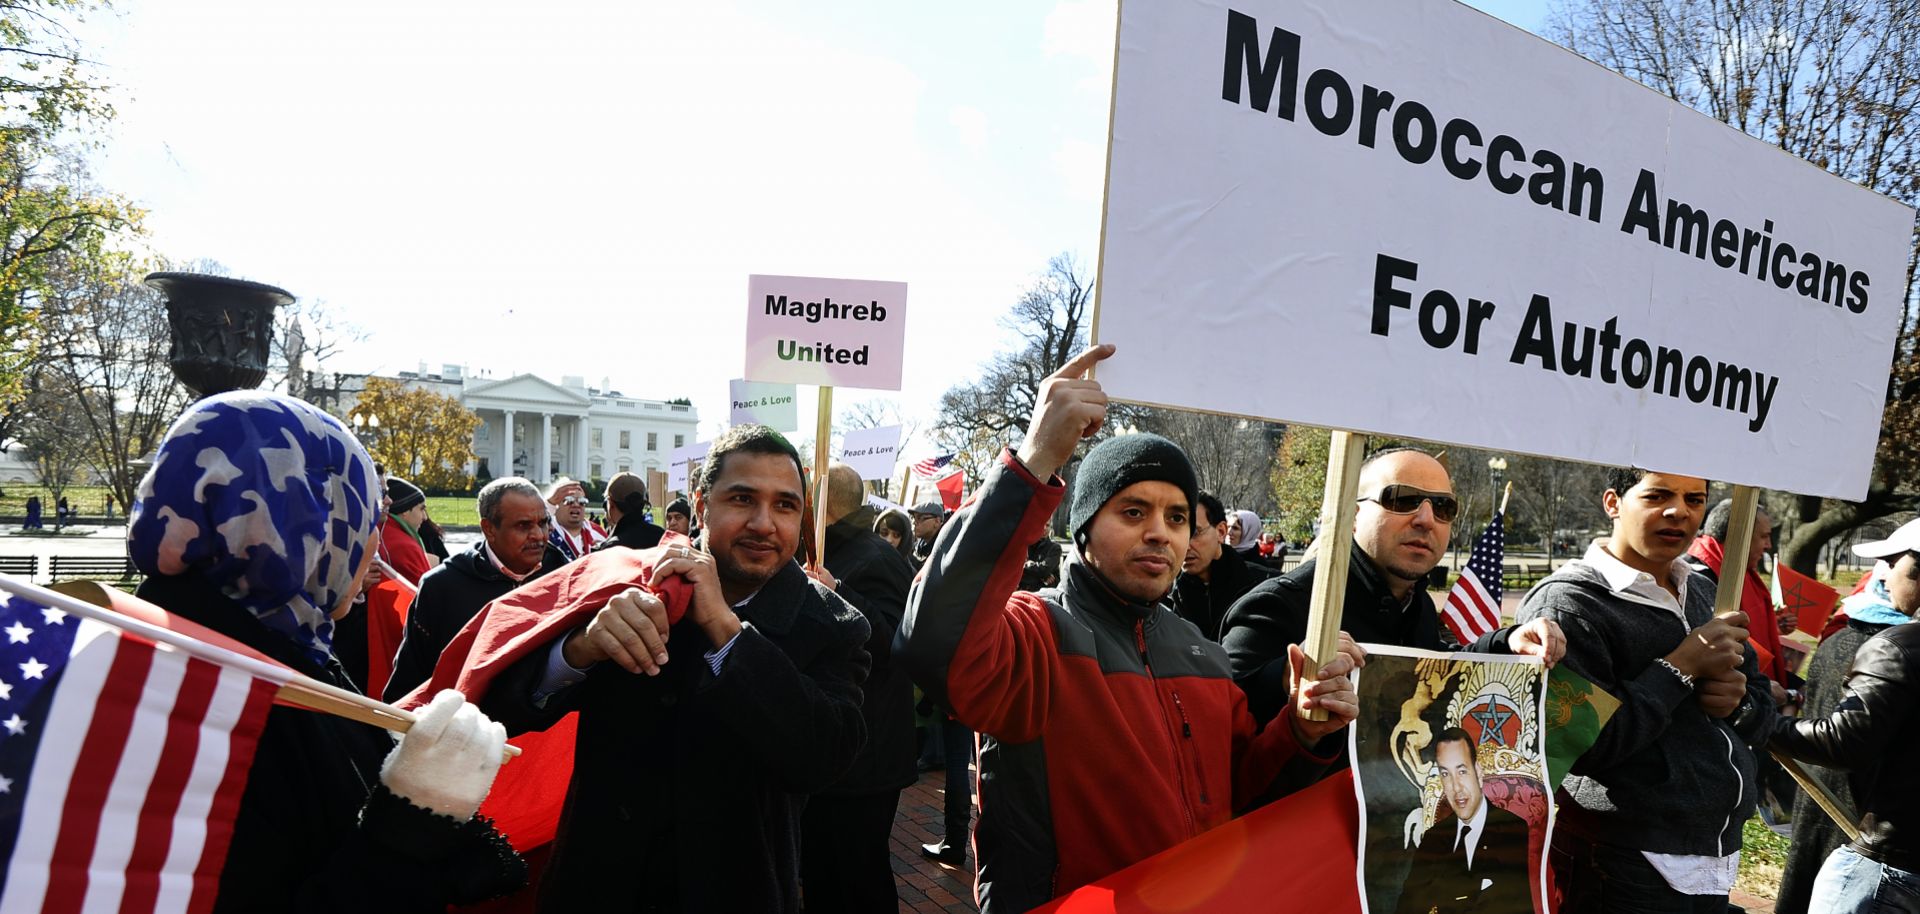 American supporters of Morocco’s “Autonomy Plan” for Western Sahara take part in a demonstration in front of the White House in Washington D.C. on Nov. 27, 2010.